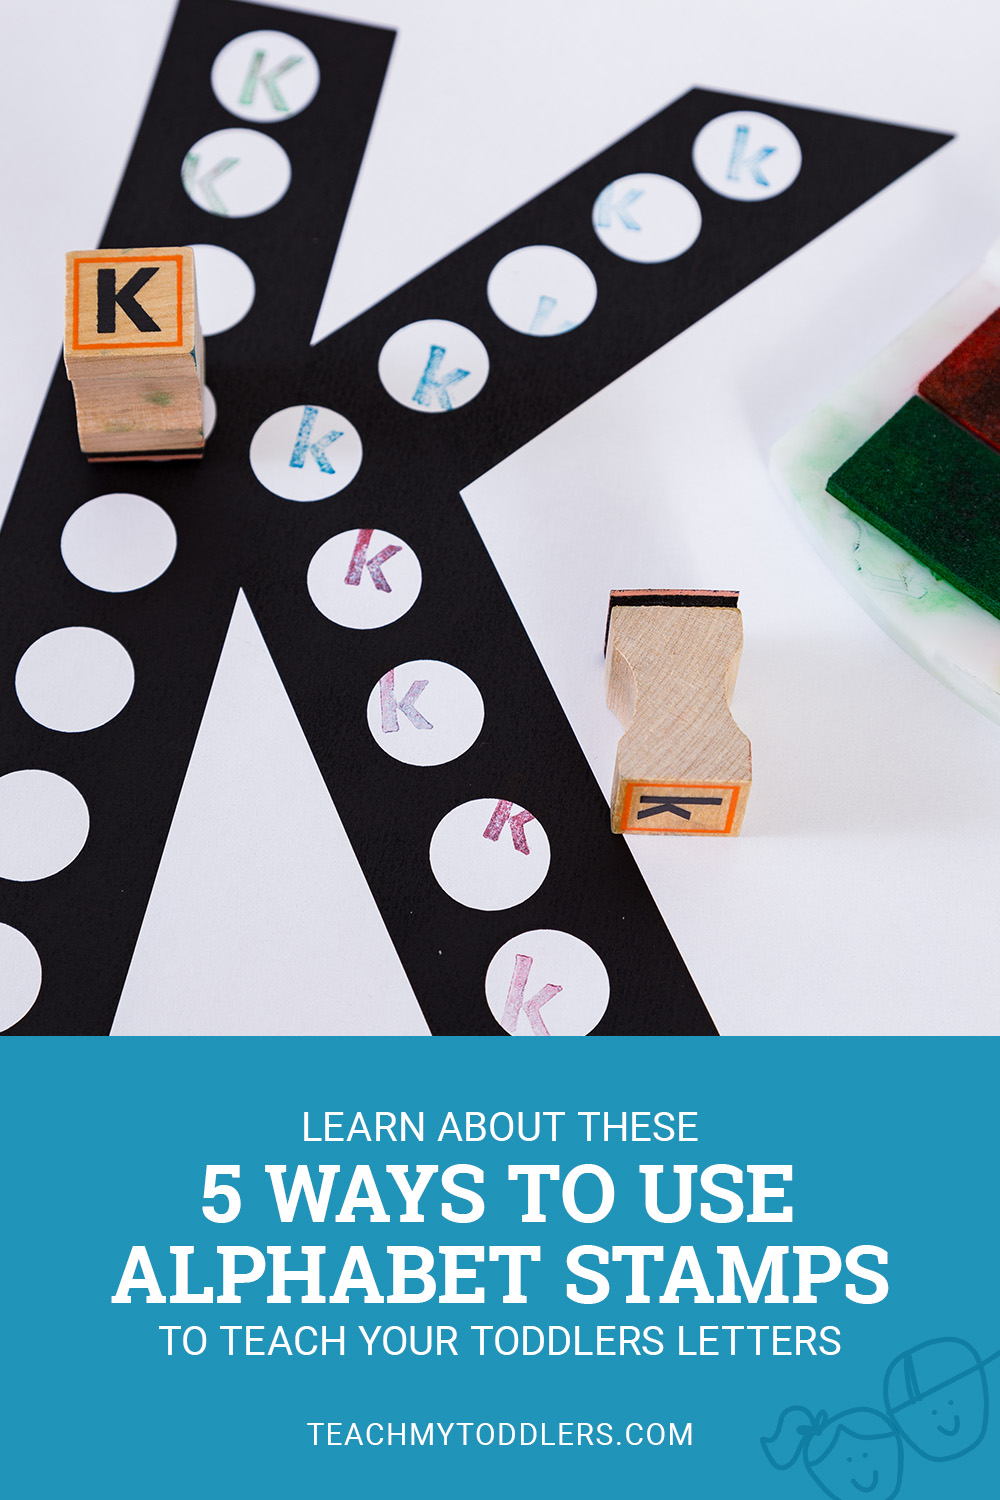 Learn about these 5 ways to use alphabet stamps to teach toddlers letters